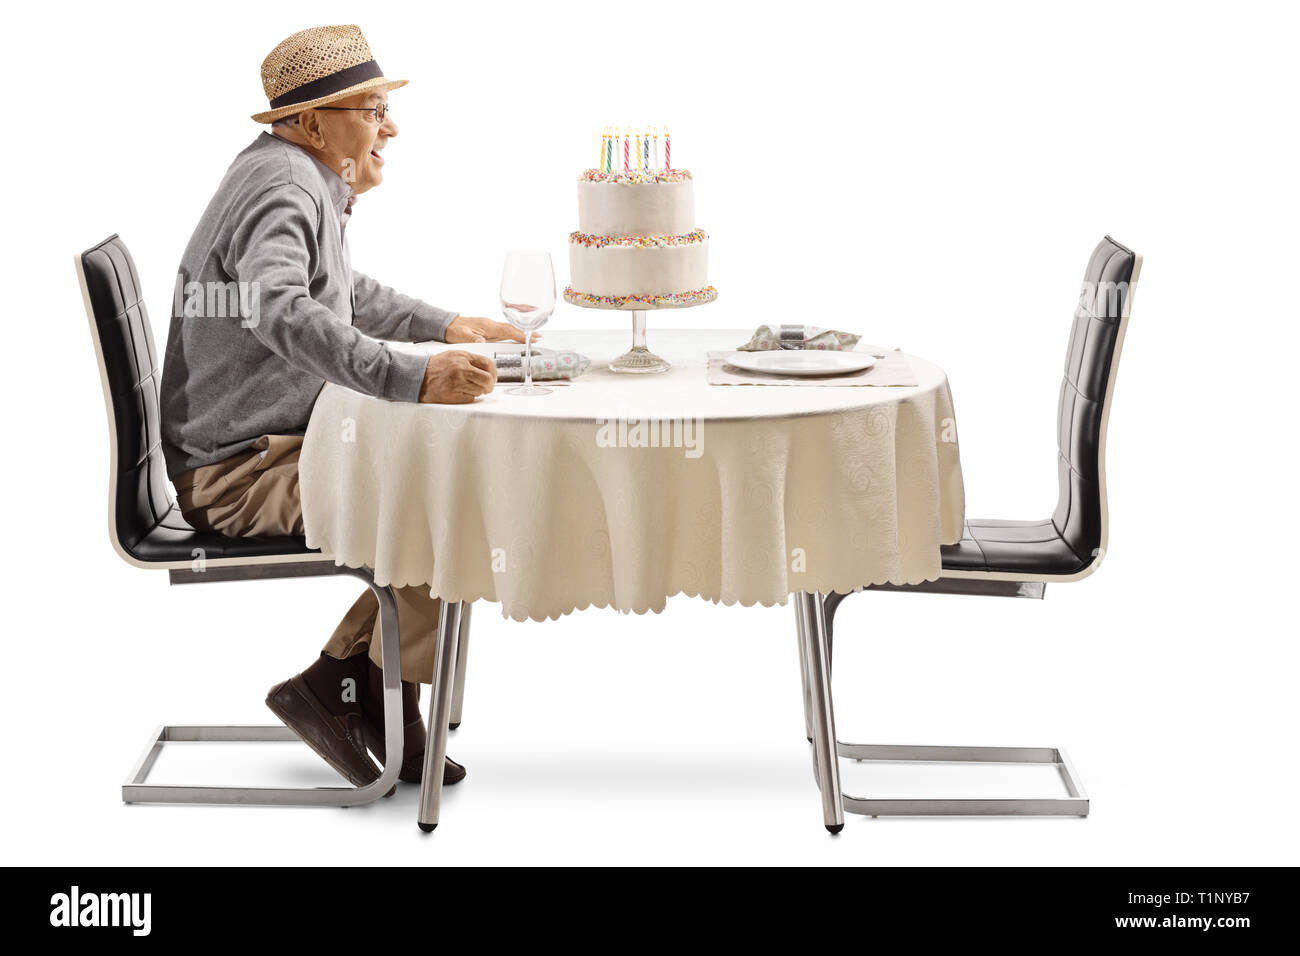 Excited senior man with a birthday cake at a restaurant table isolated on white background Stock Photo